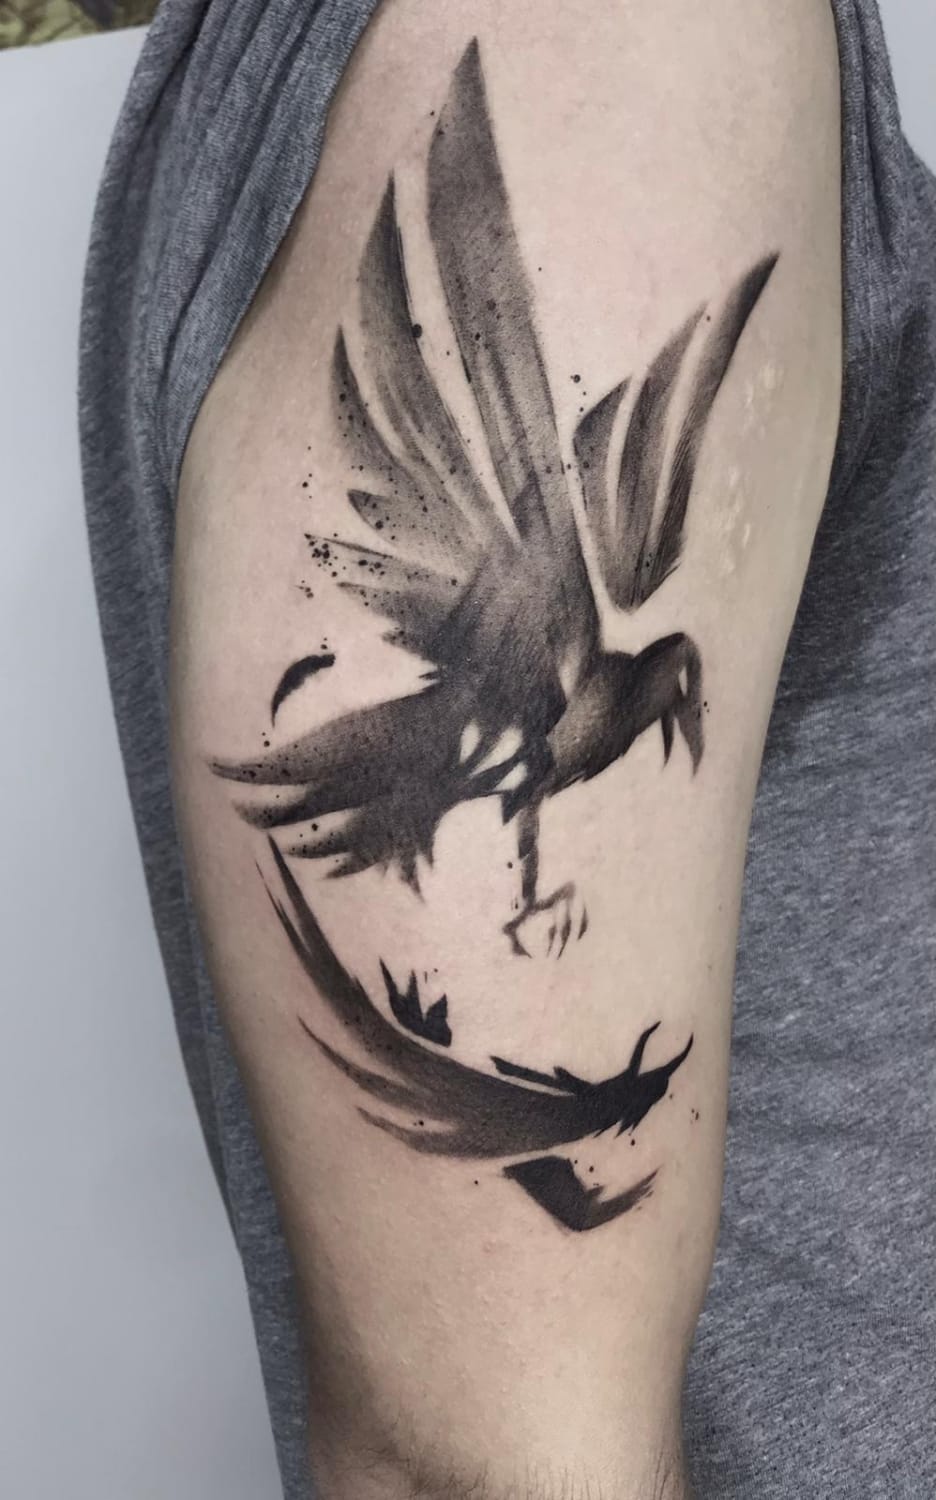 Karma phoenix from infamous second son, made by adir mizrahi from oopstattoo israel